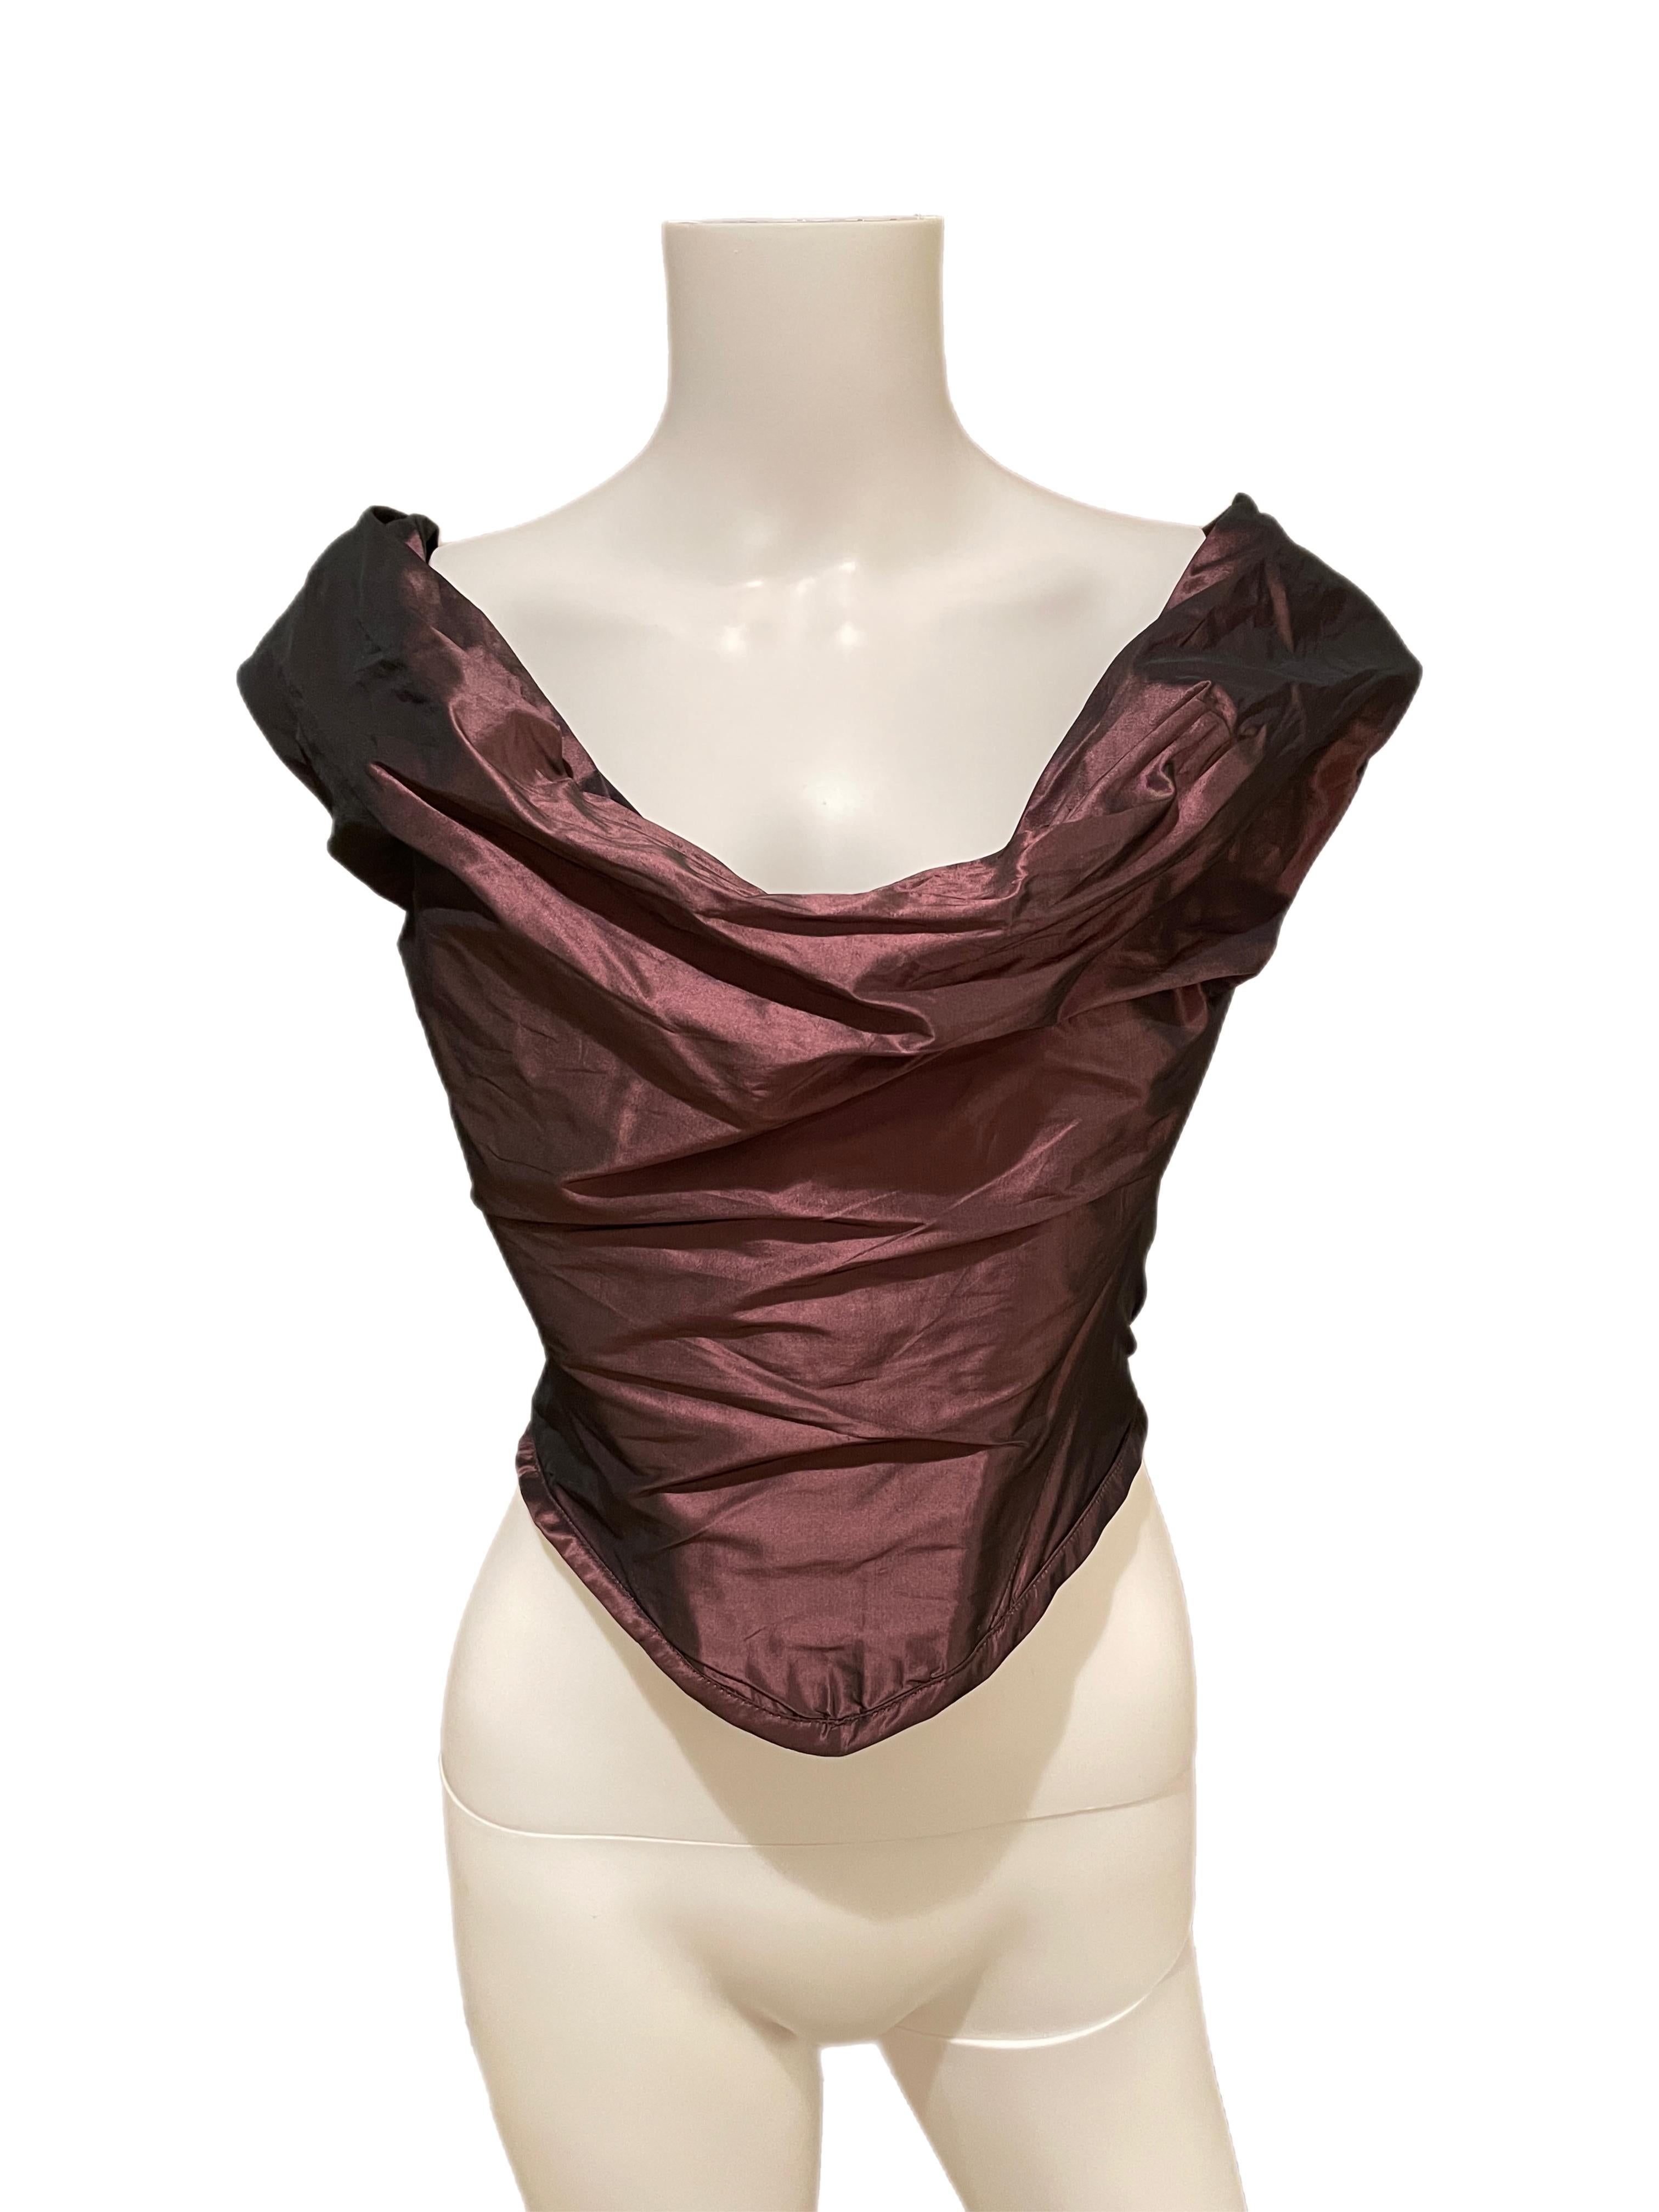 Vivienne Westwood size II maroon burgundy purple 49% silk bustier corset. Excellent condition. Fits like a S/M. Crazy flattering to the body and the color is incredible. You can make it more off the shoulder or pull it up a bit. I think this corset